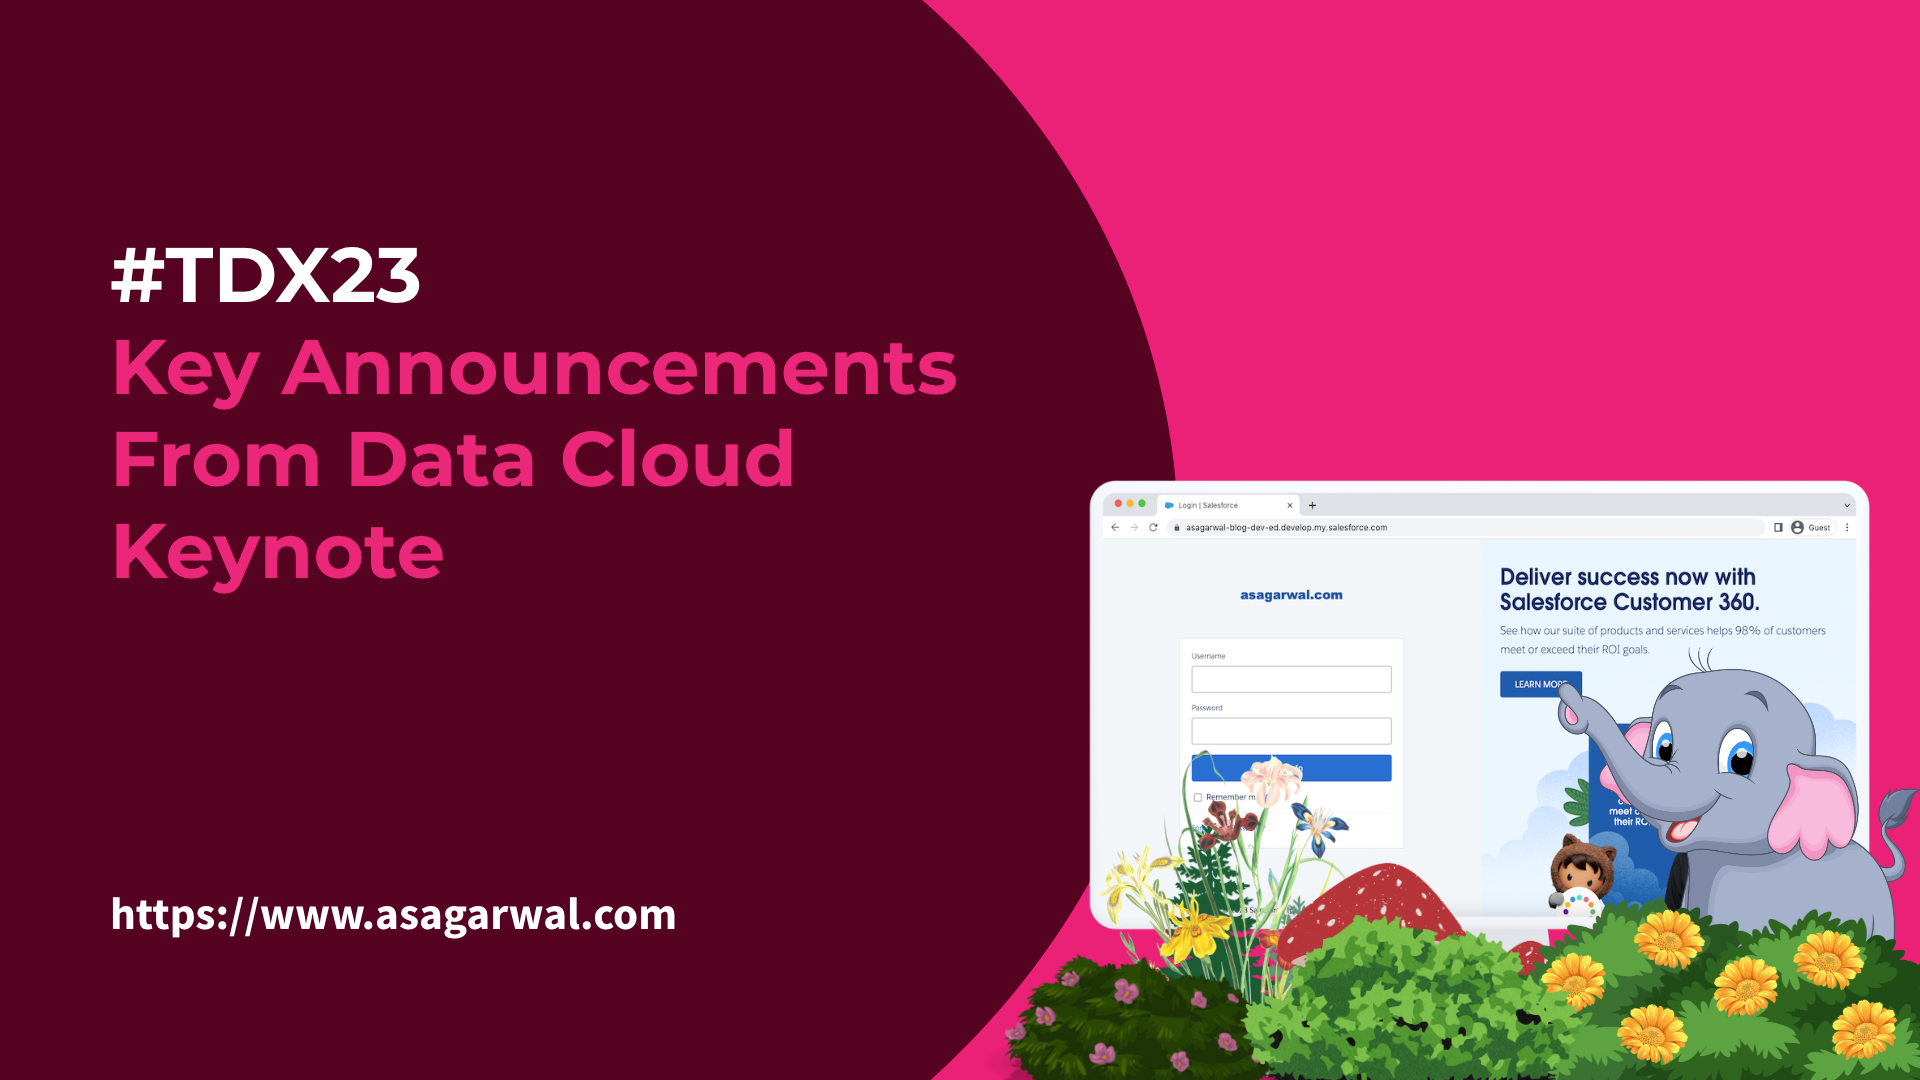 #TDX23 - Key Announcements From Data Cloud Keynote